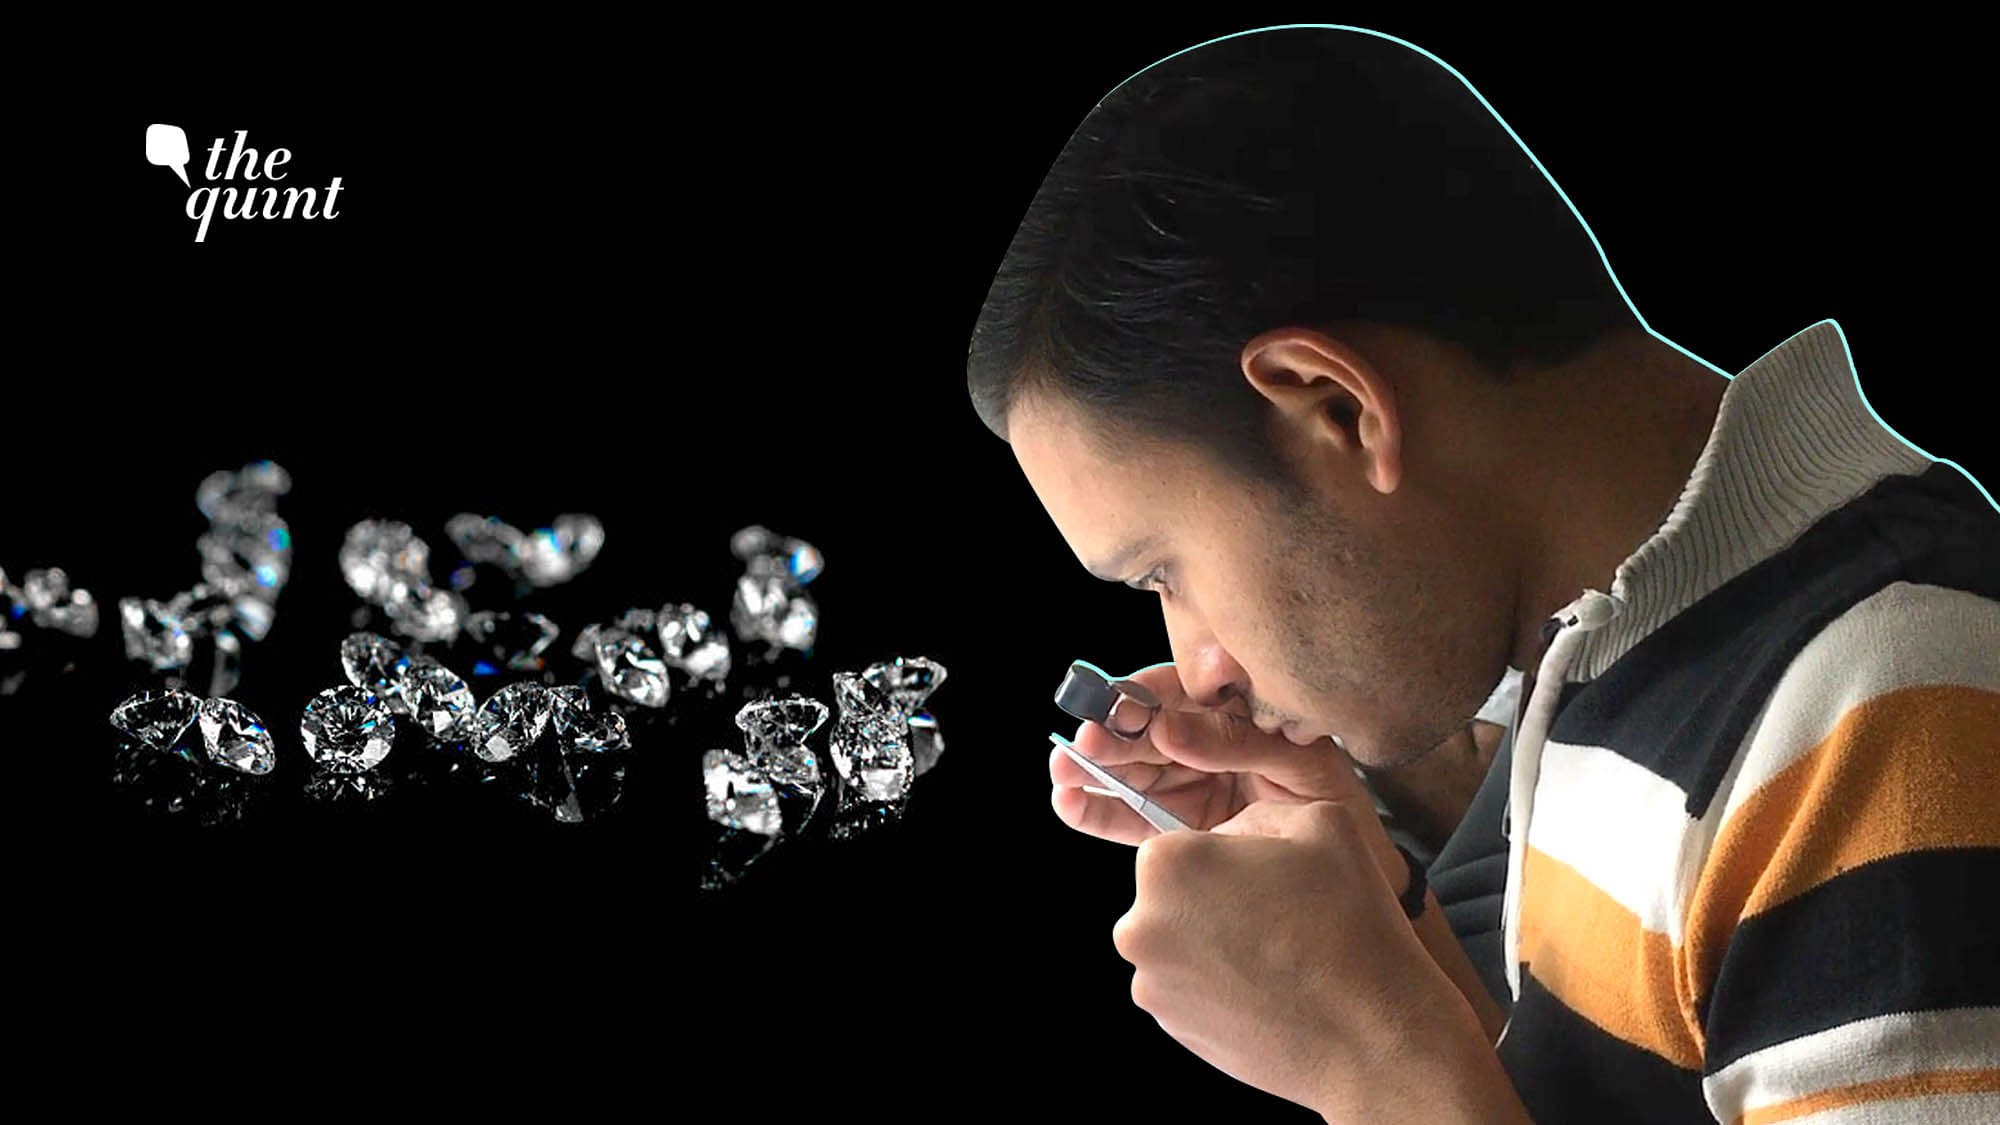 As many as 20,000 diamonds workers have been laid off in Surat due to the crippling recession.